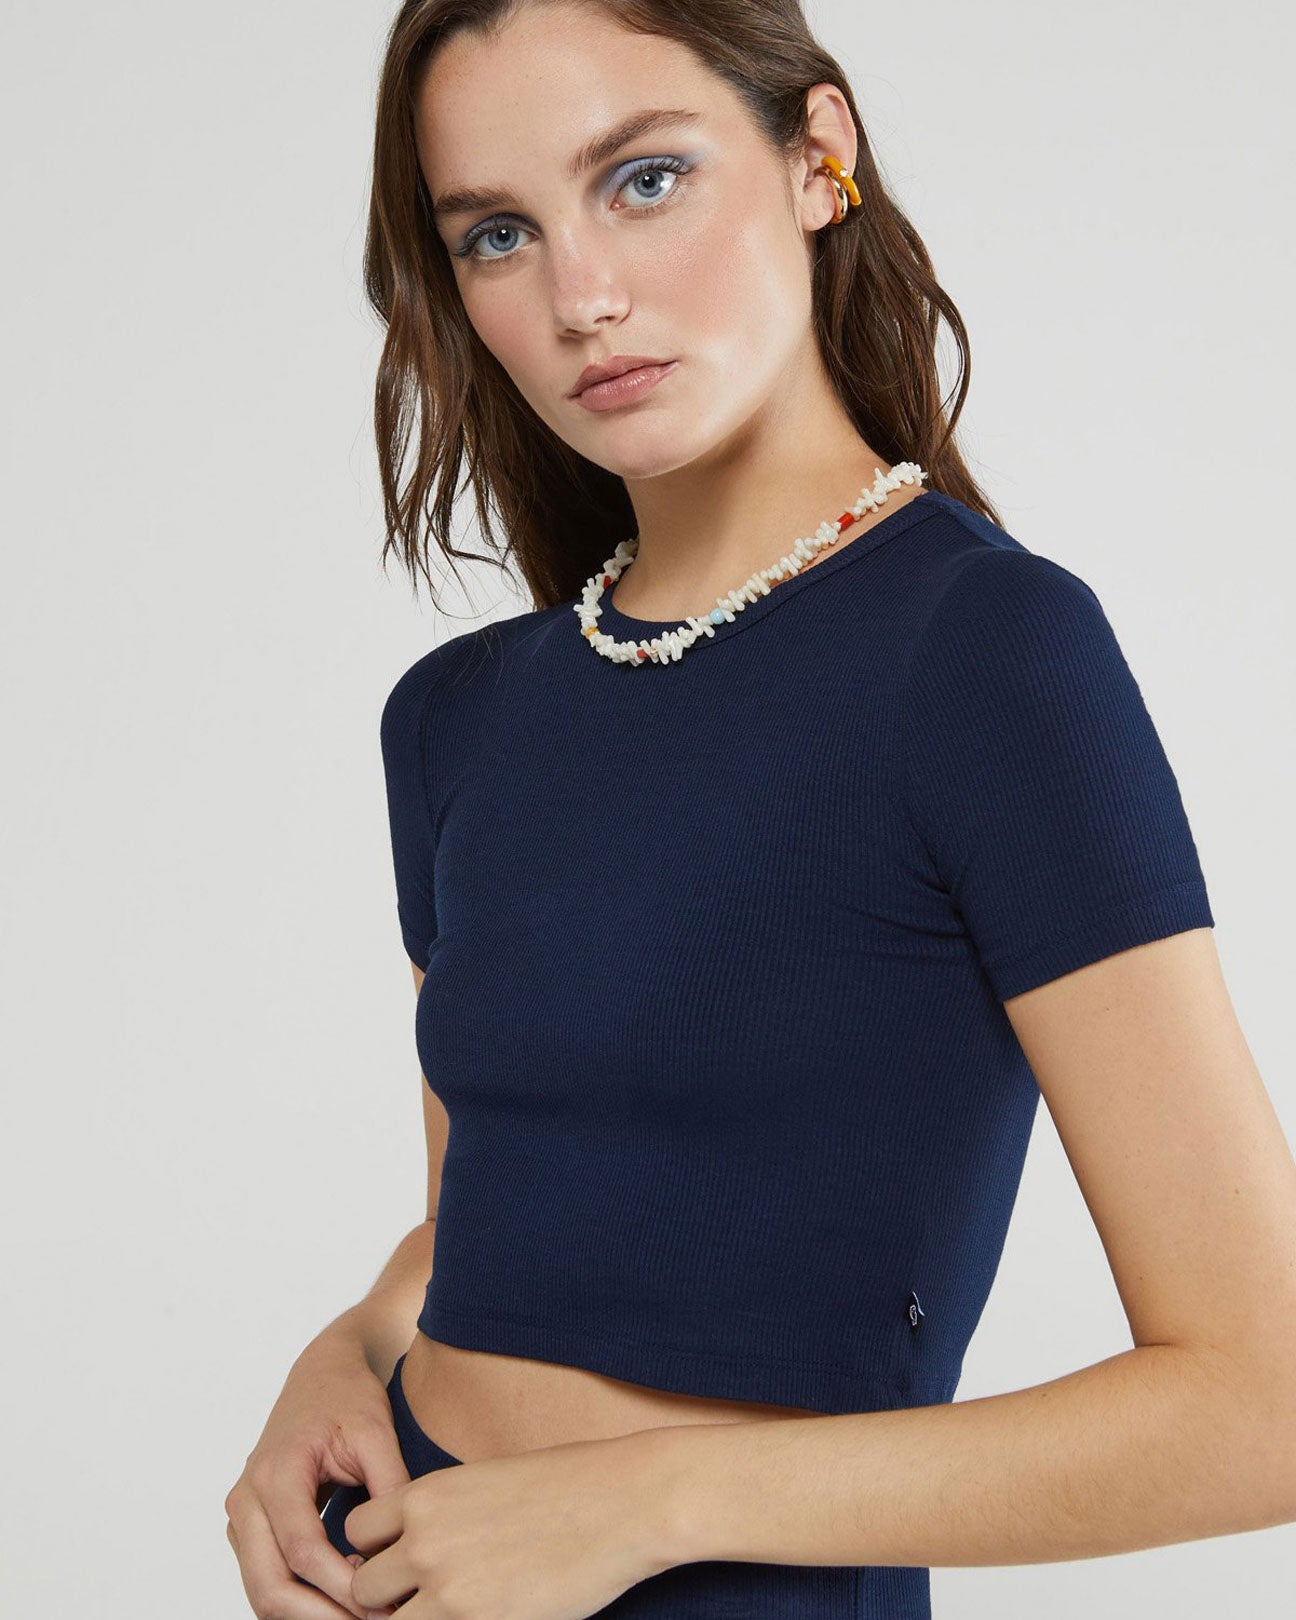 OTTOD'AME Ribbed Cropped Tee in Navy available at Lahn.shop